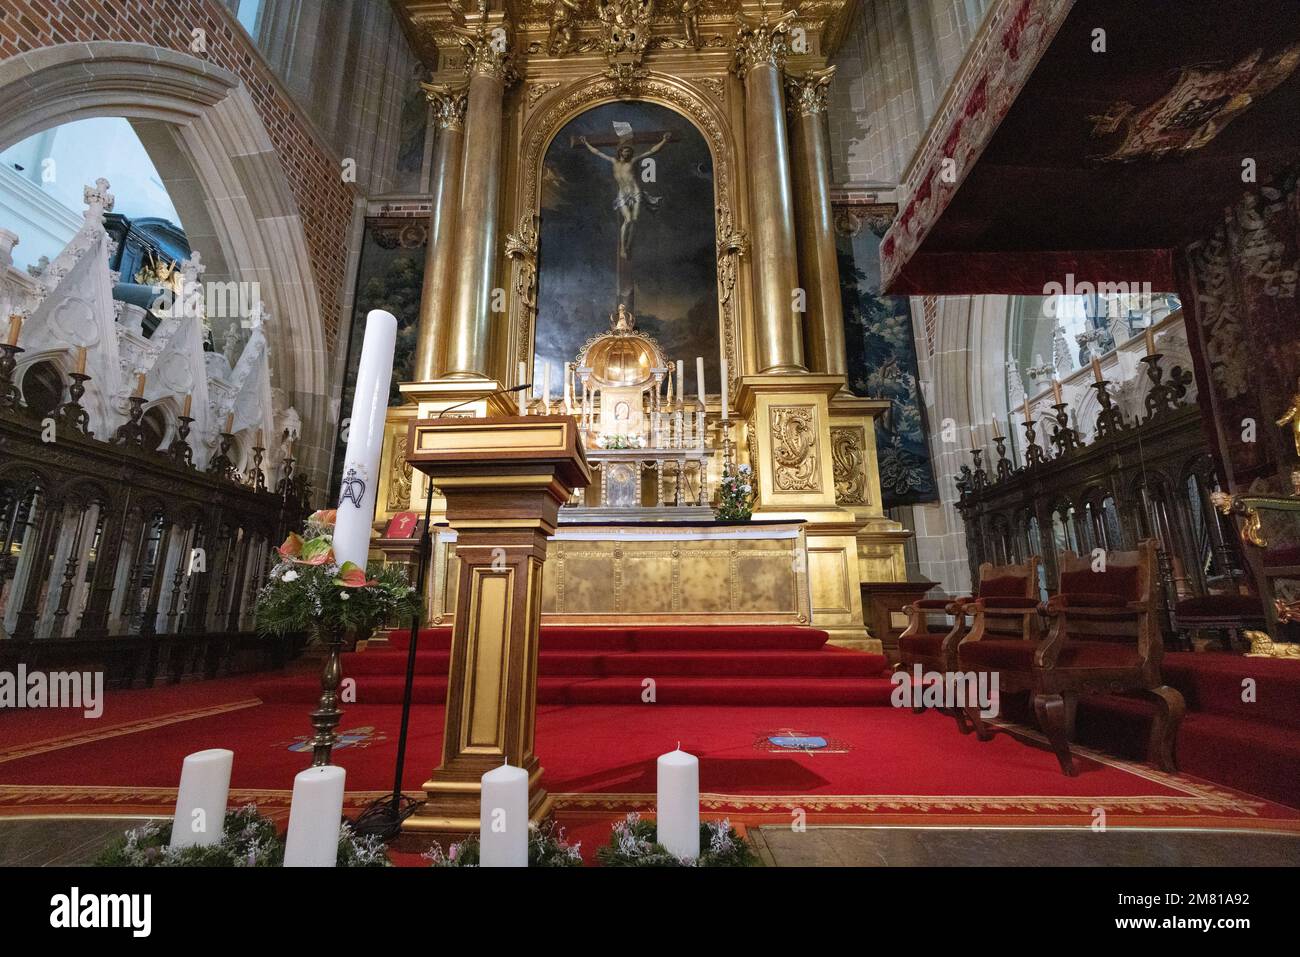 Wawel Cathedral altar, Krakow Poland; The ornate altar , Wawel Cathedral interior. Krakow Poland Europe Stock Photo